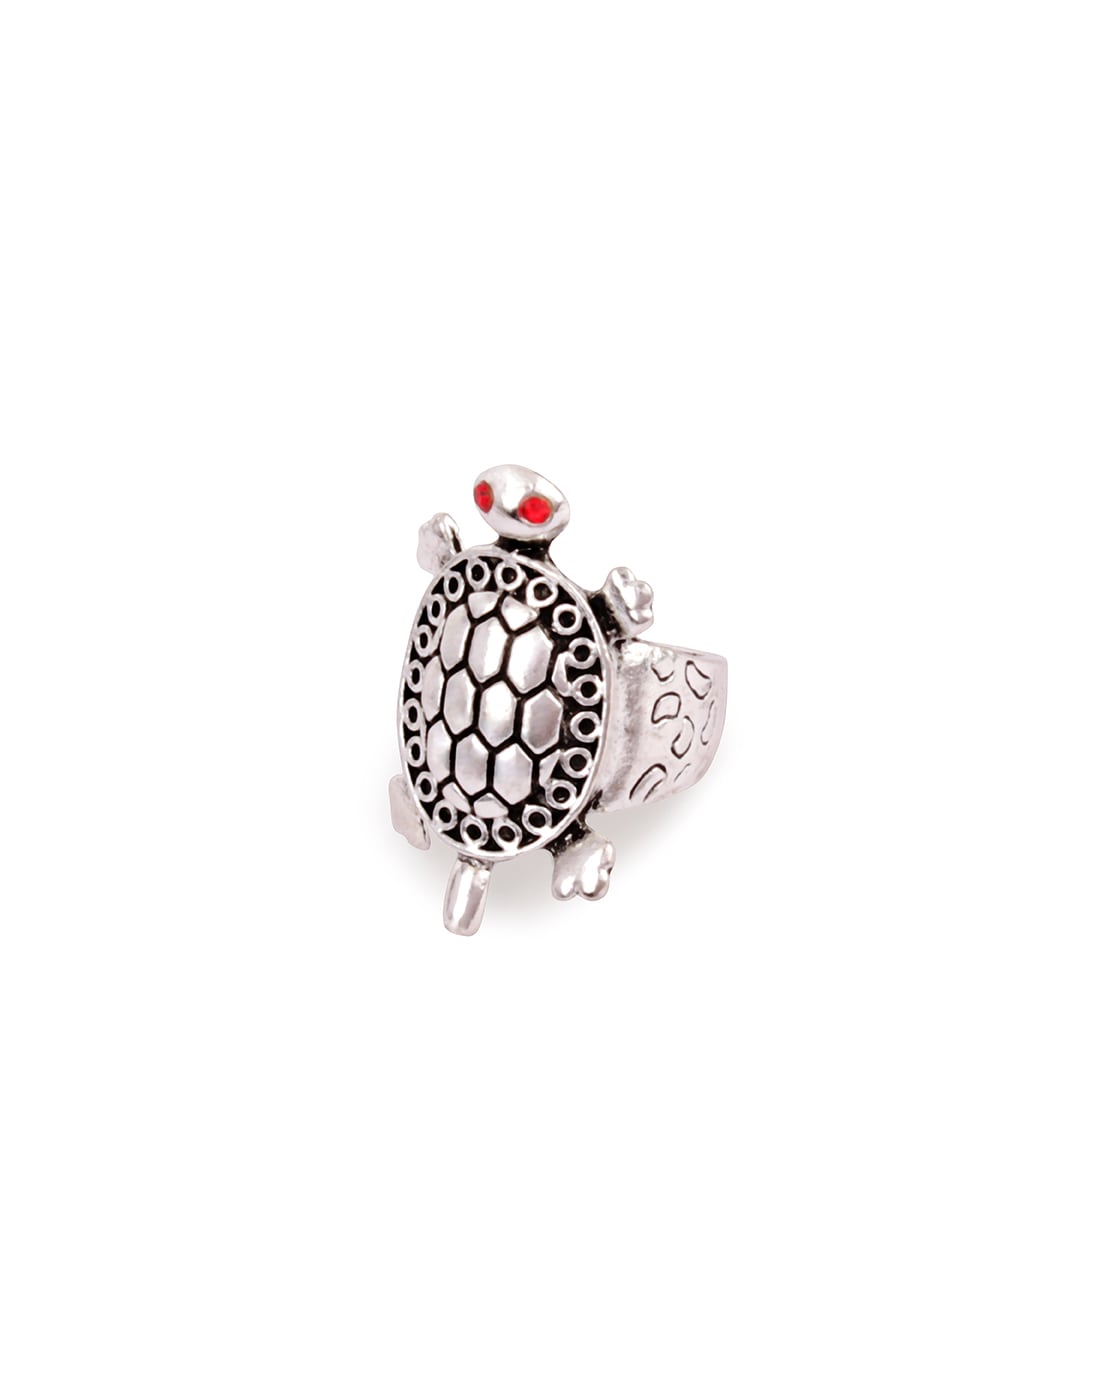 Tortoise Designed Silver Ring Manufacturer Supplier from Chandigarh India